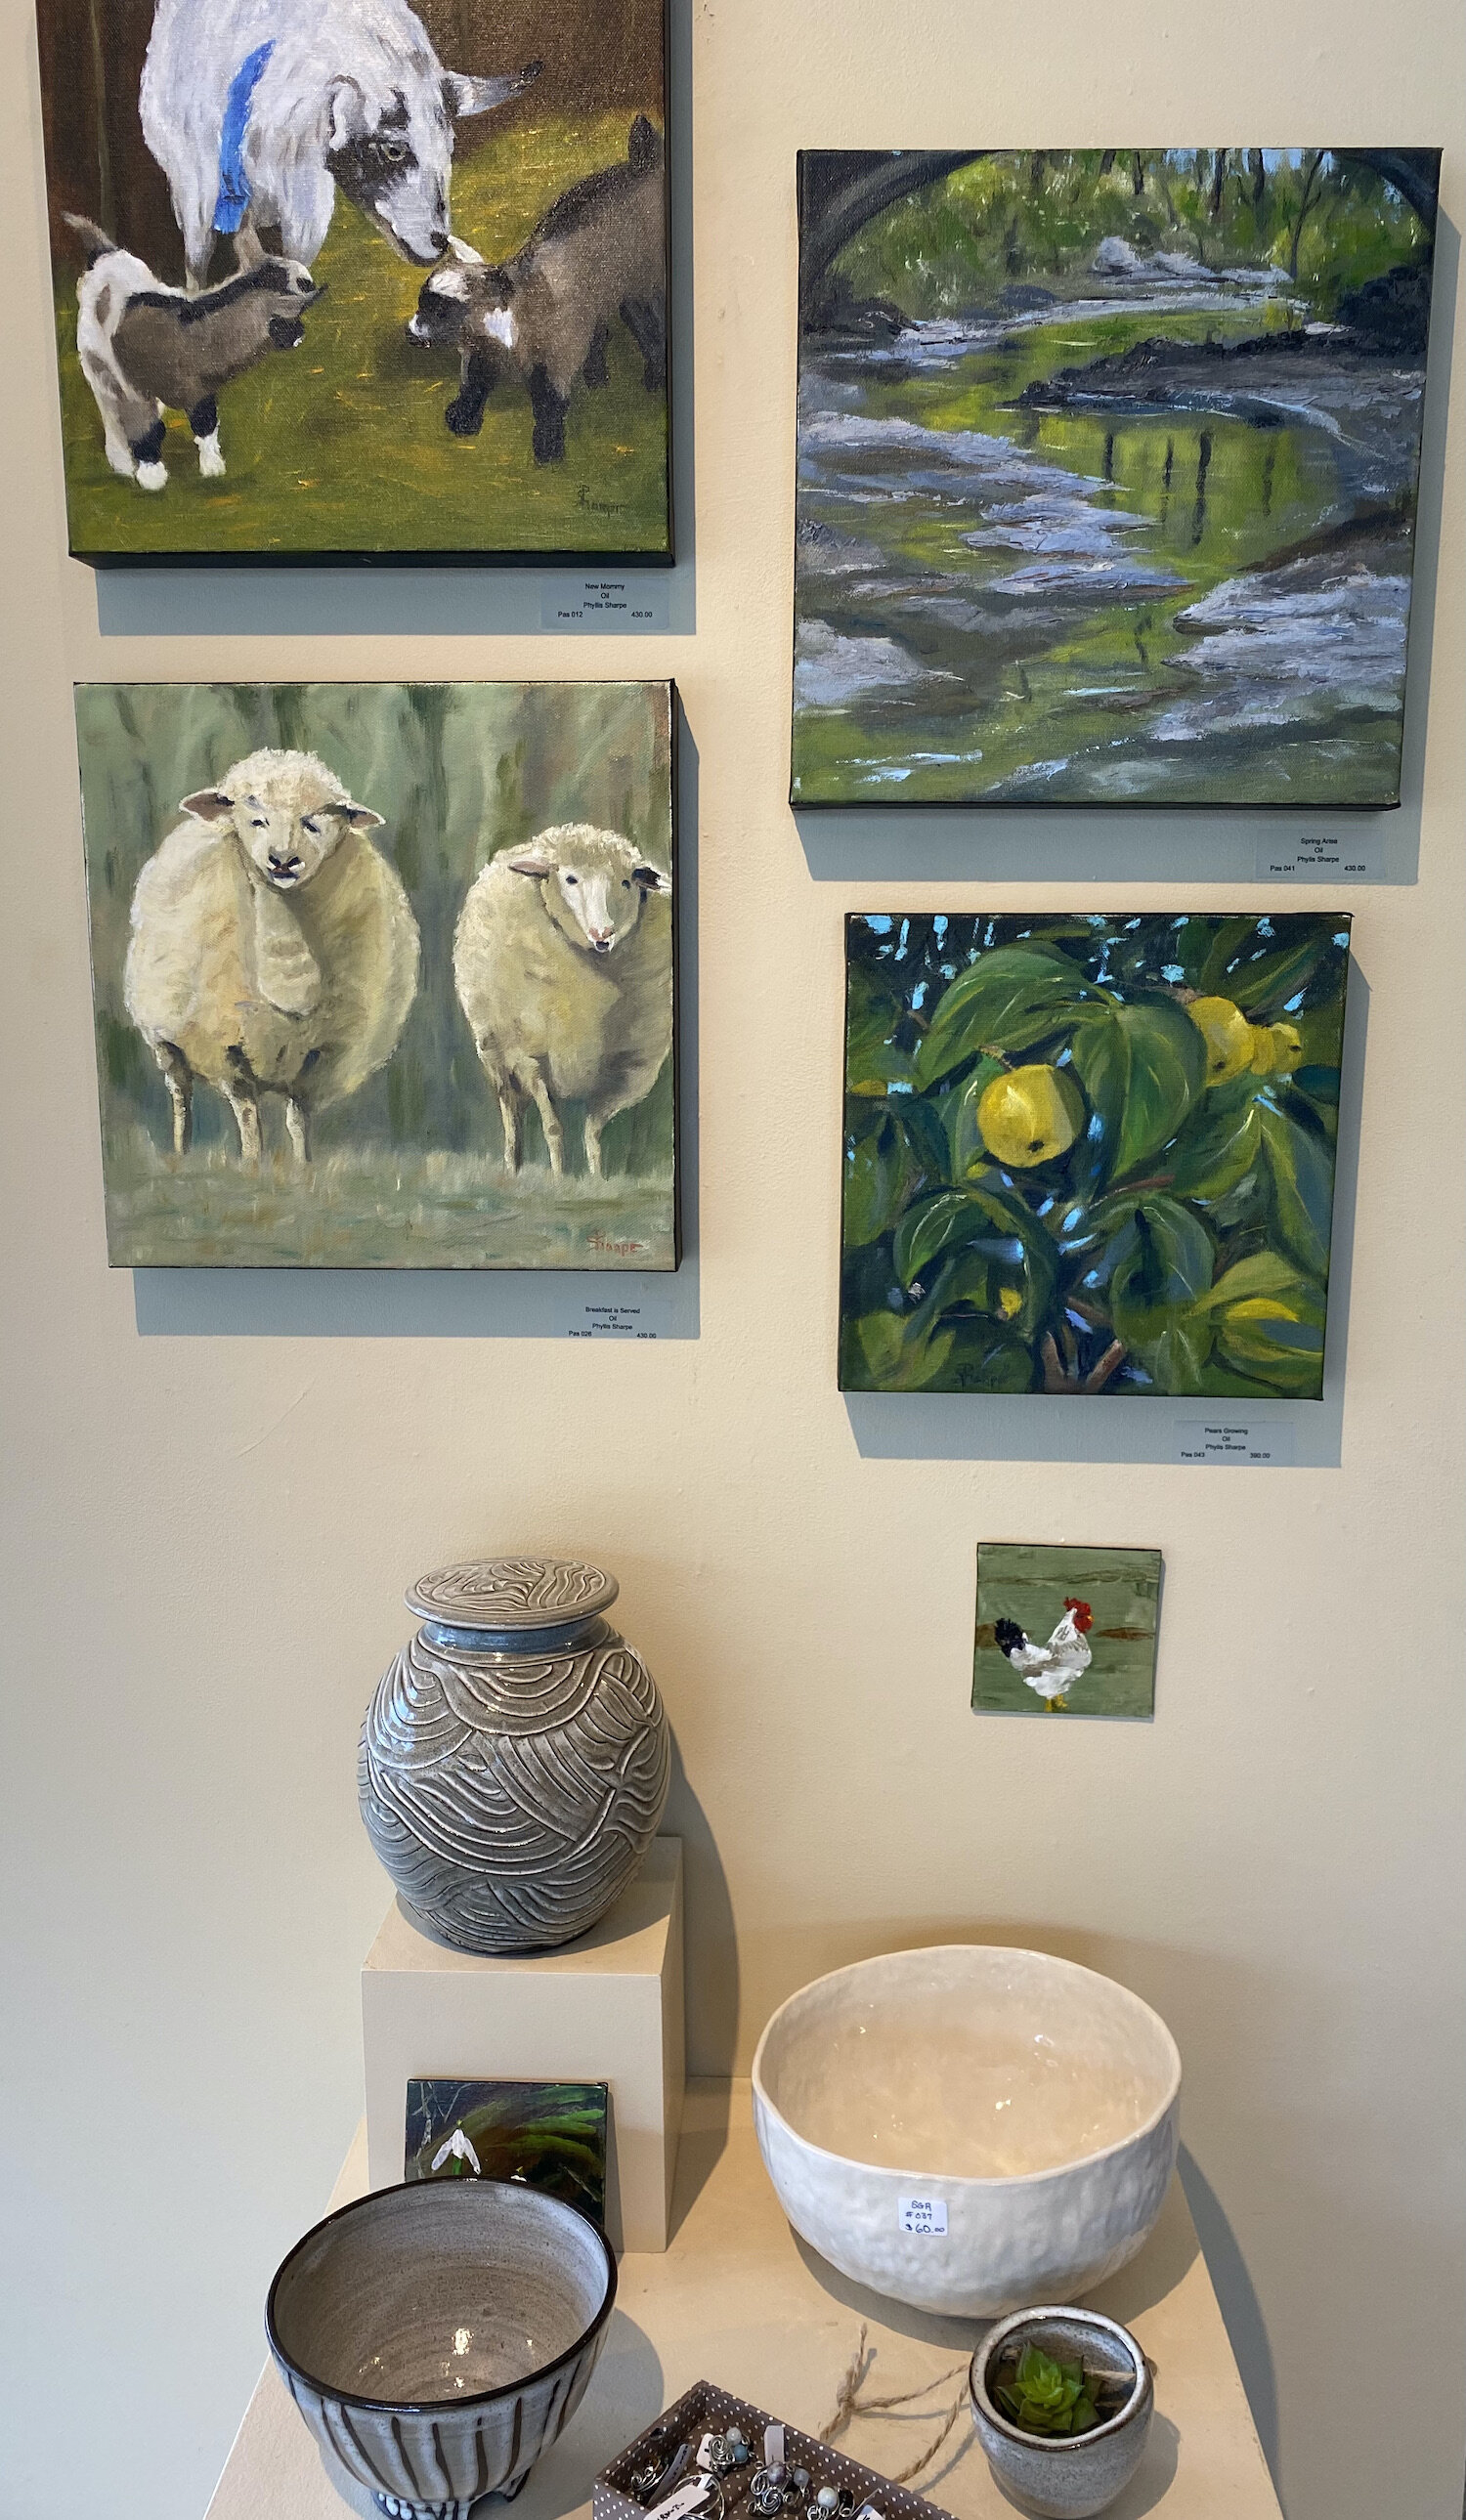 sheep-goats-rivers-pears-roosters-works-phyllis-sharpe-4300.jpeg